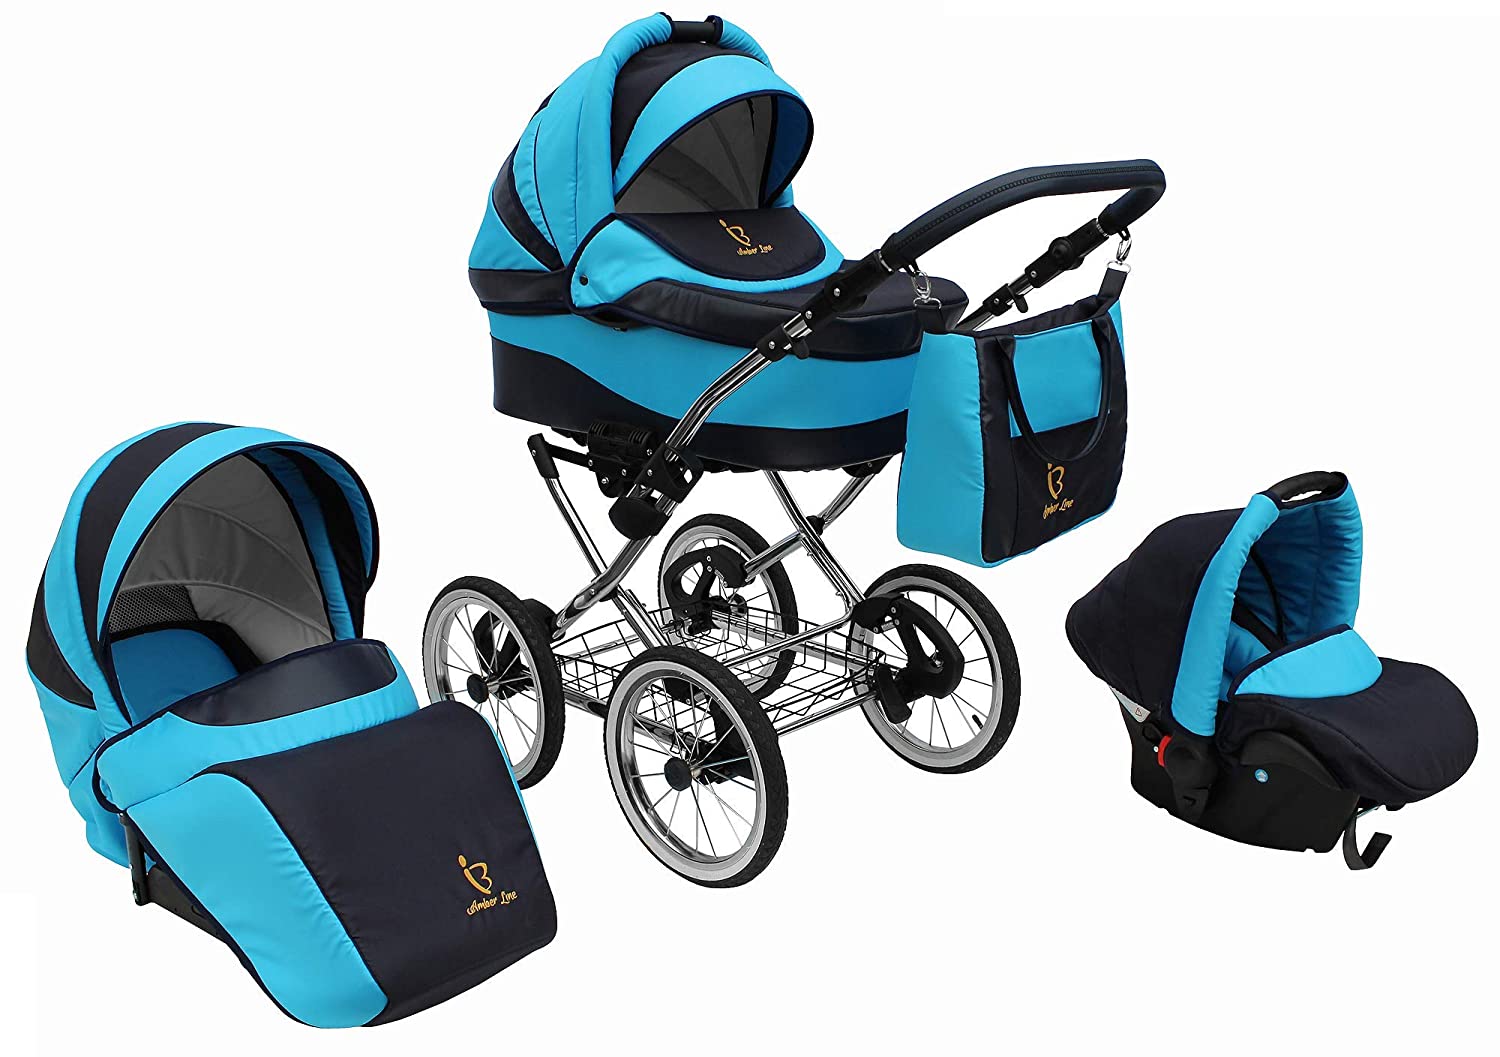 SKYLINE Classic Retro Style Combination Pram Buggy 3-in-1 Travel System Car Seat (Isofix) (Blue/14 Inch Air Tyres)